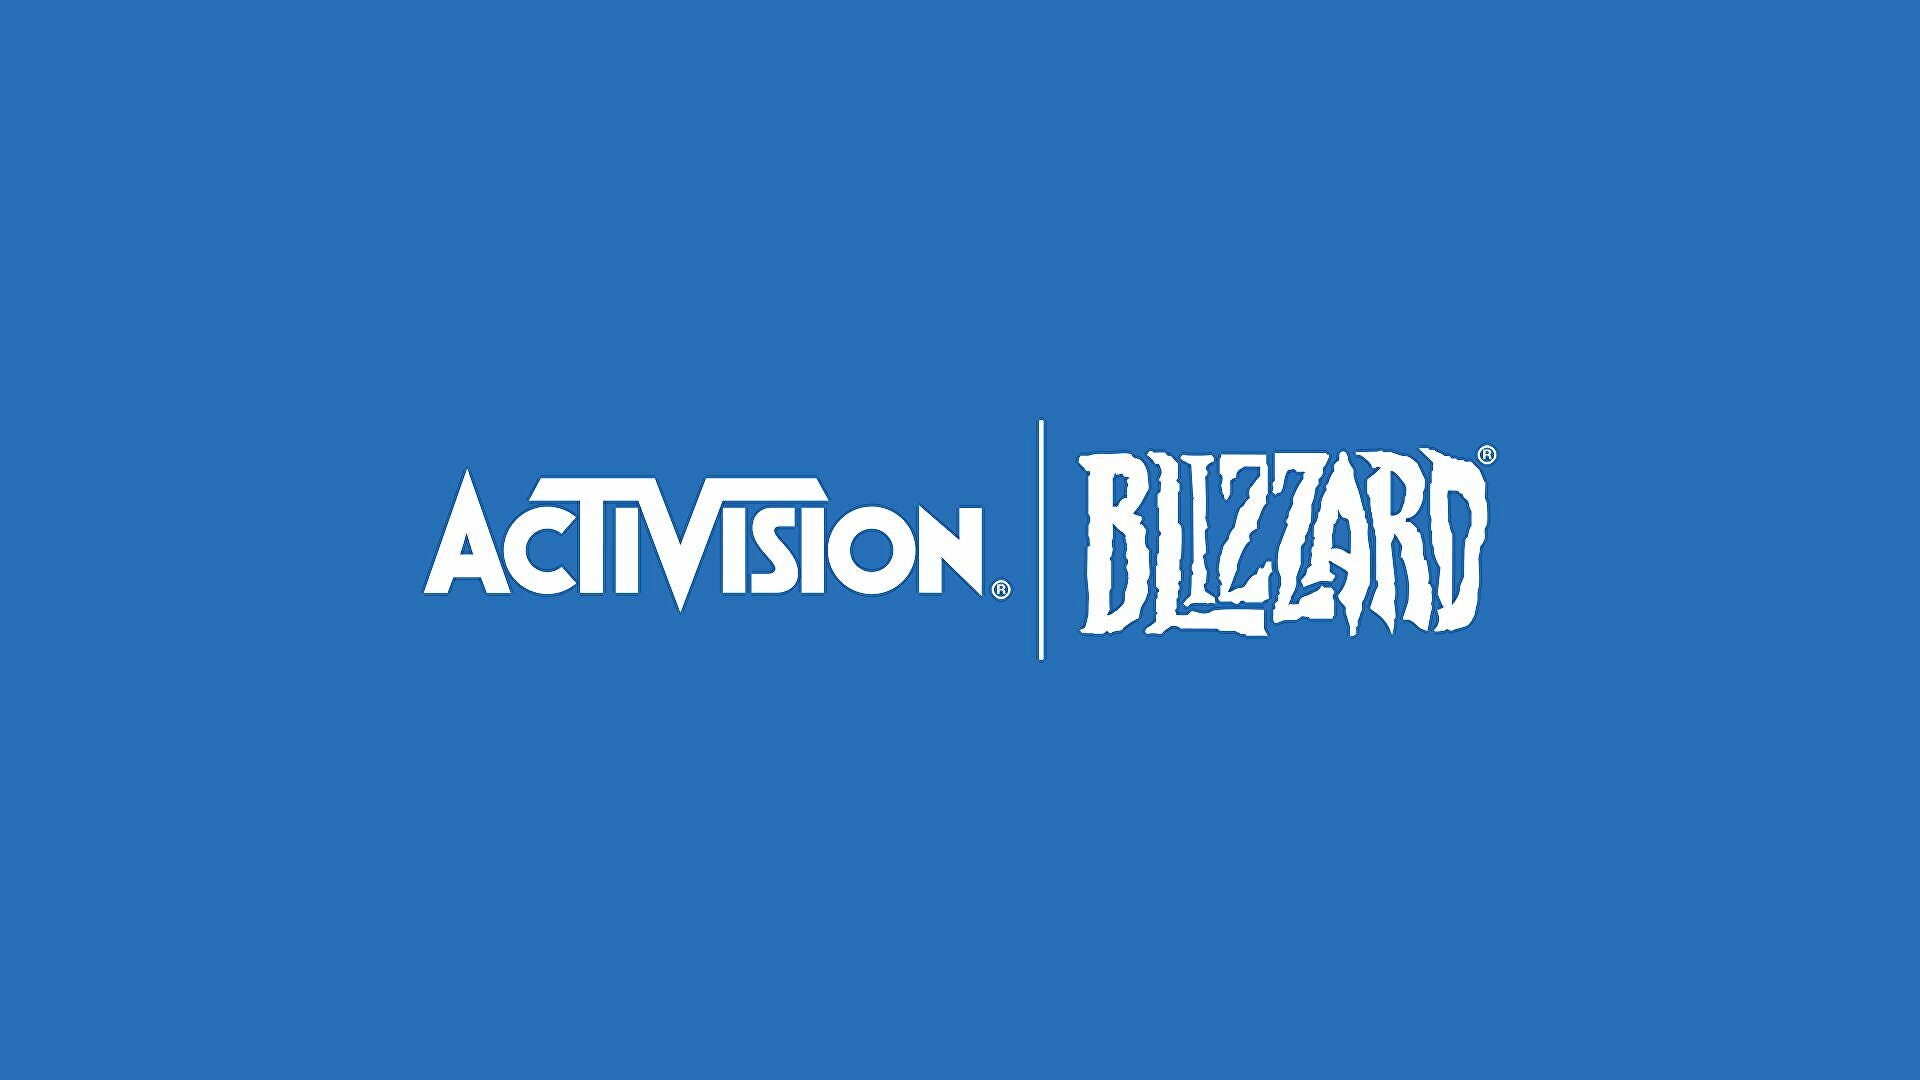 Activision Blizzard board says there's “no evidence” they tolerated any "reported" harassment